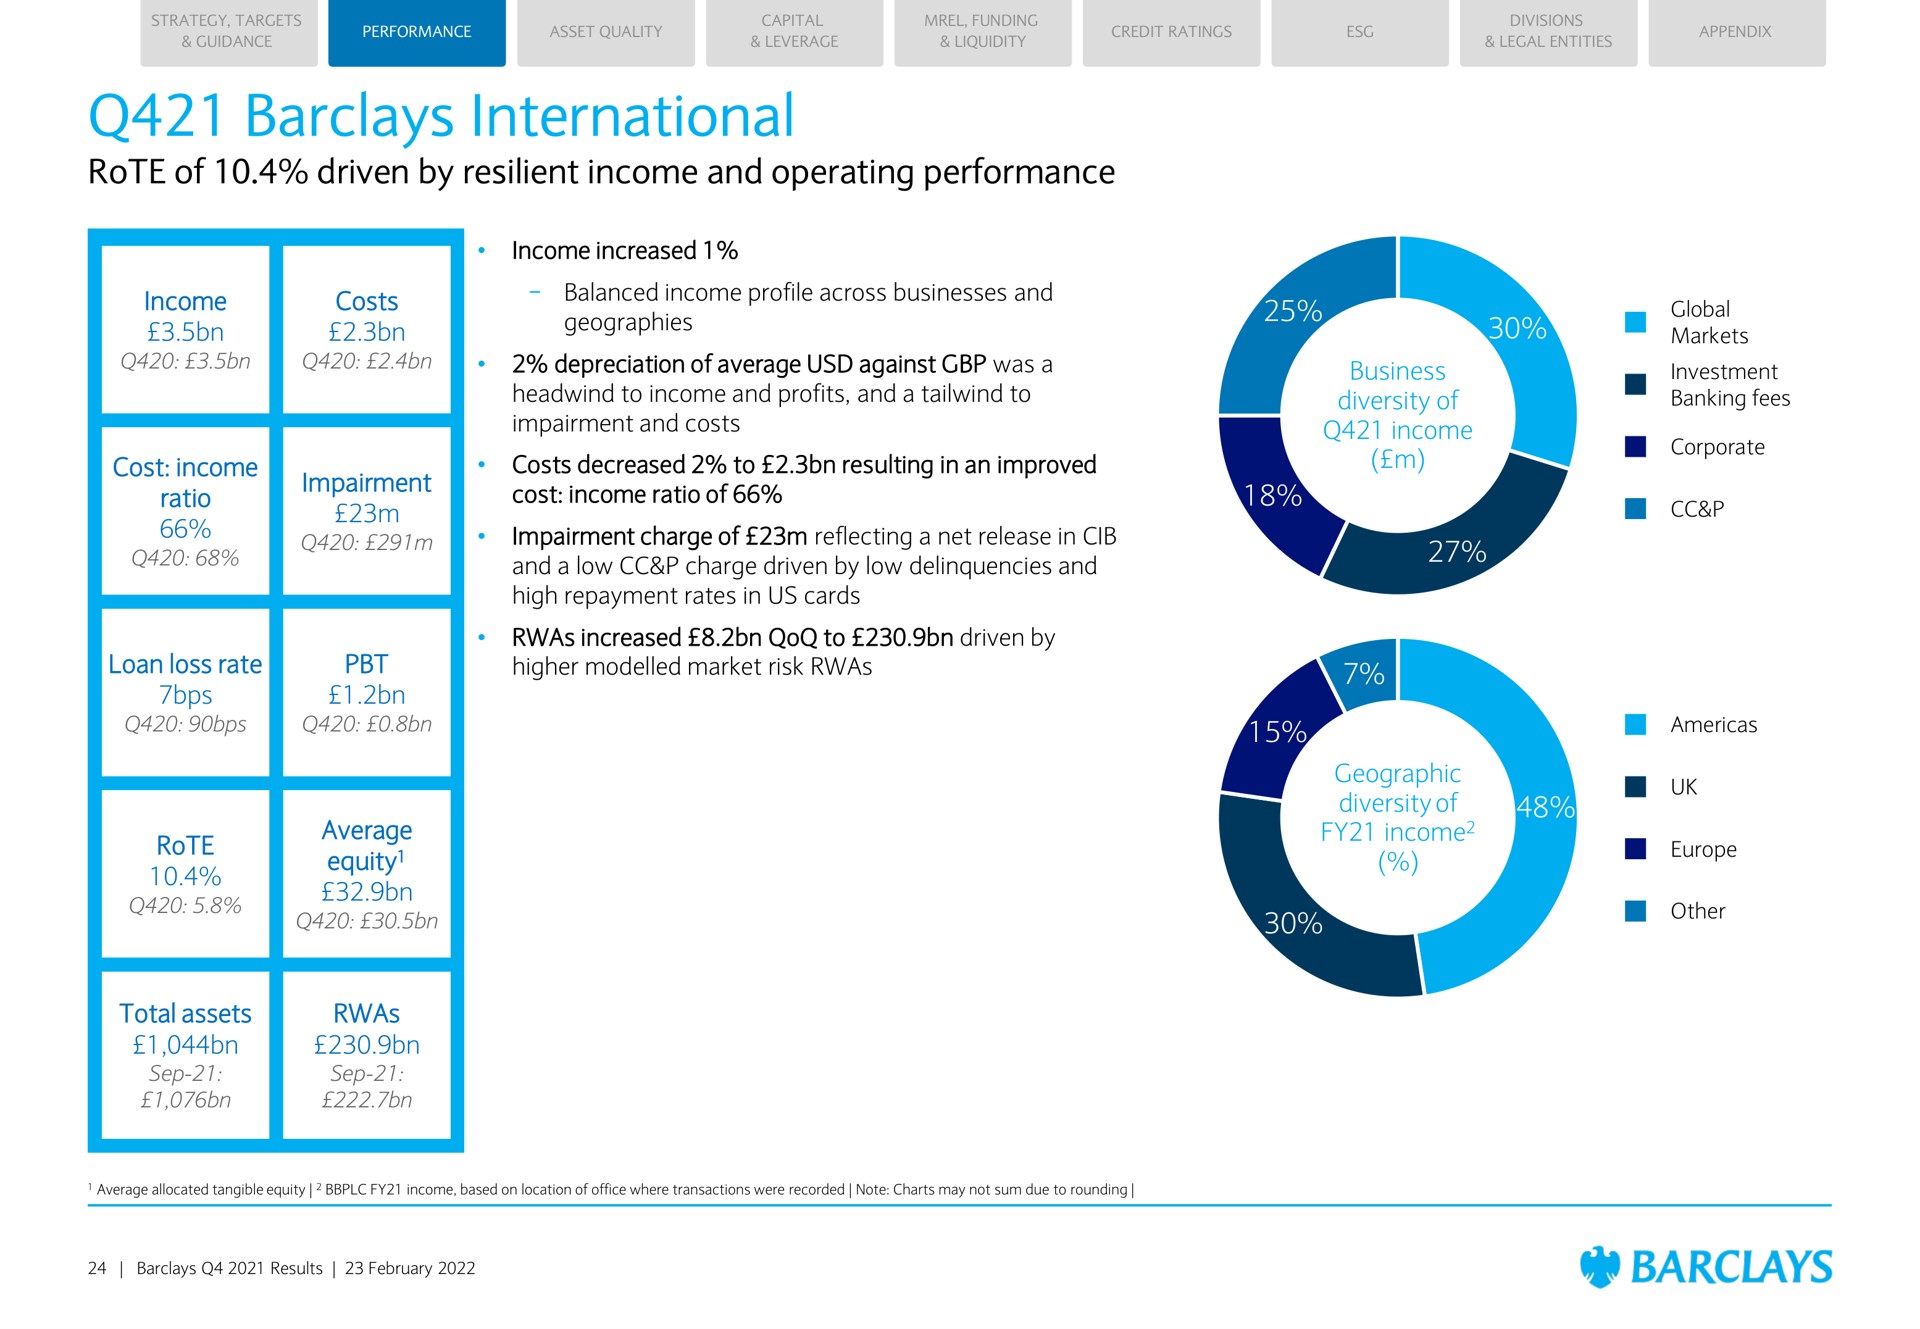 international rote of driven by resilient income and operating performance business diversity of income geographic diversity of income income costs cost income ratio impairment loan loss rate rote average equity total assets strategy targets capital append geographies markets | Barclays